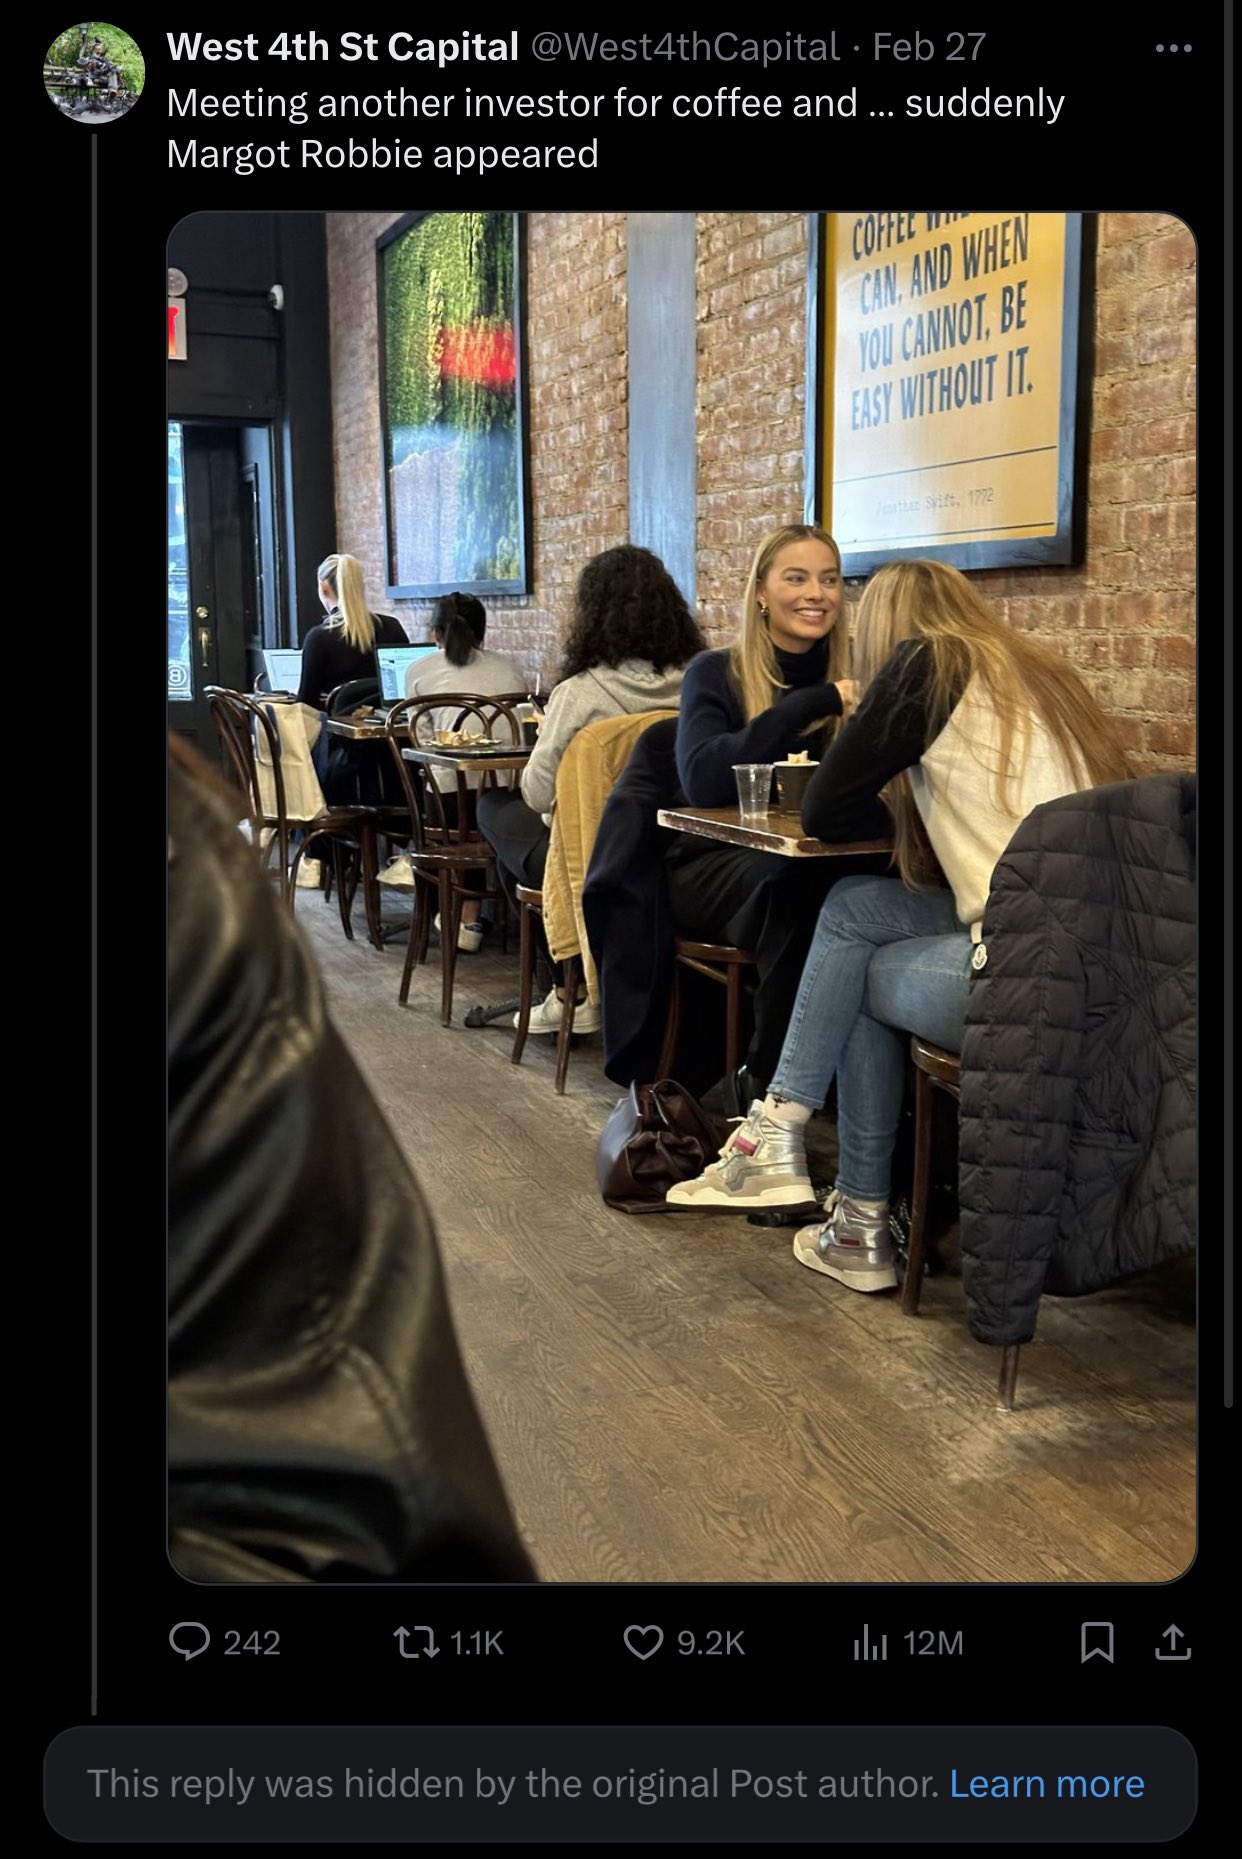 sarah j maas margot robbie - West 4th St Capital Feb 27 Meeting another investor for coffee and ... suddenly Margot Robbie appeared Coffee W Can, And When You Cannot Be Easy Without It. the Swift, 1772 242 l 12M This was hidden by the original Post author